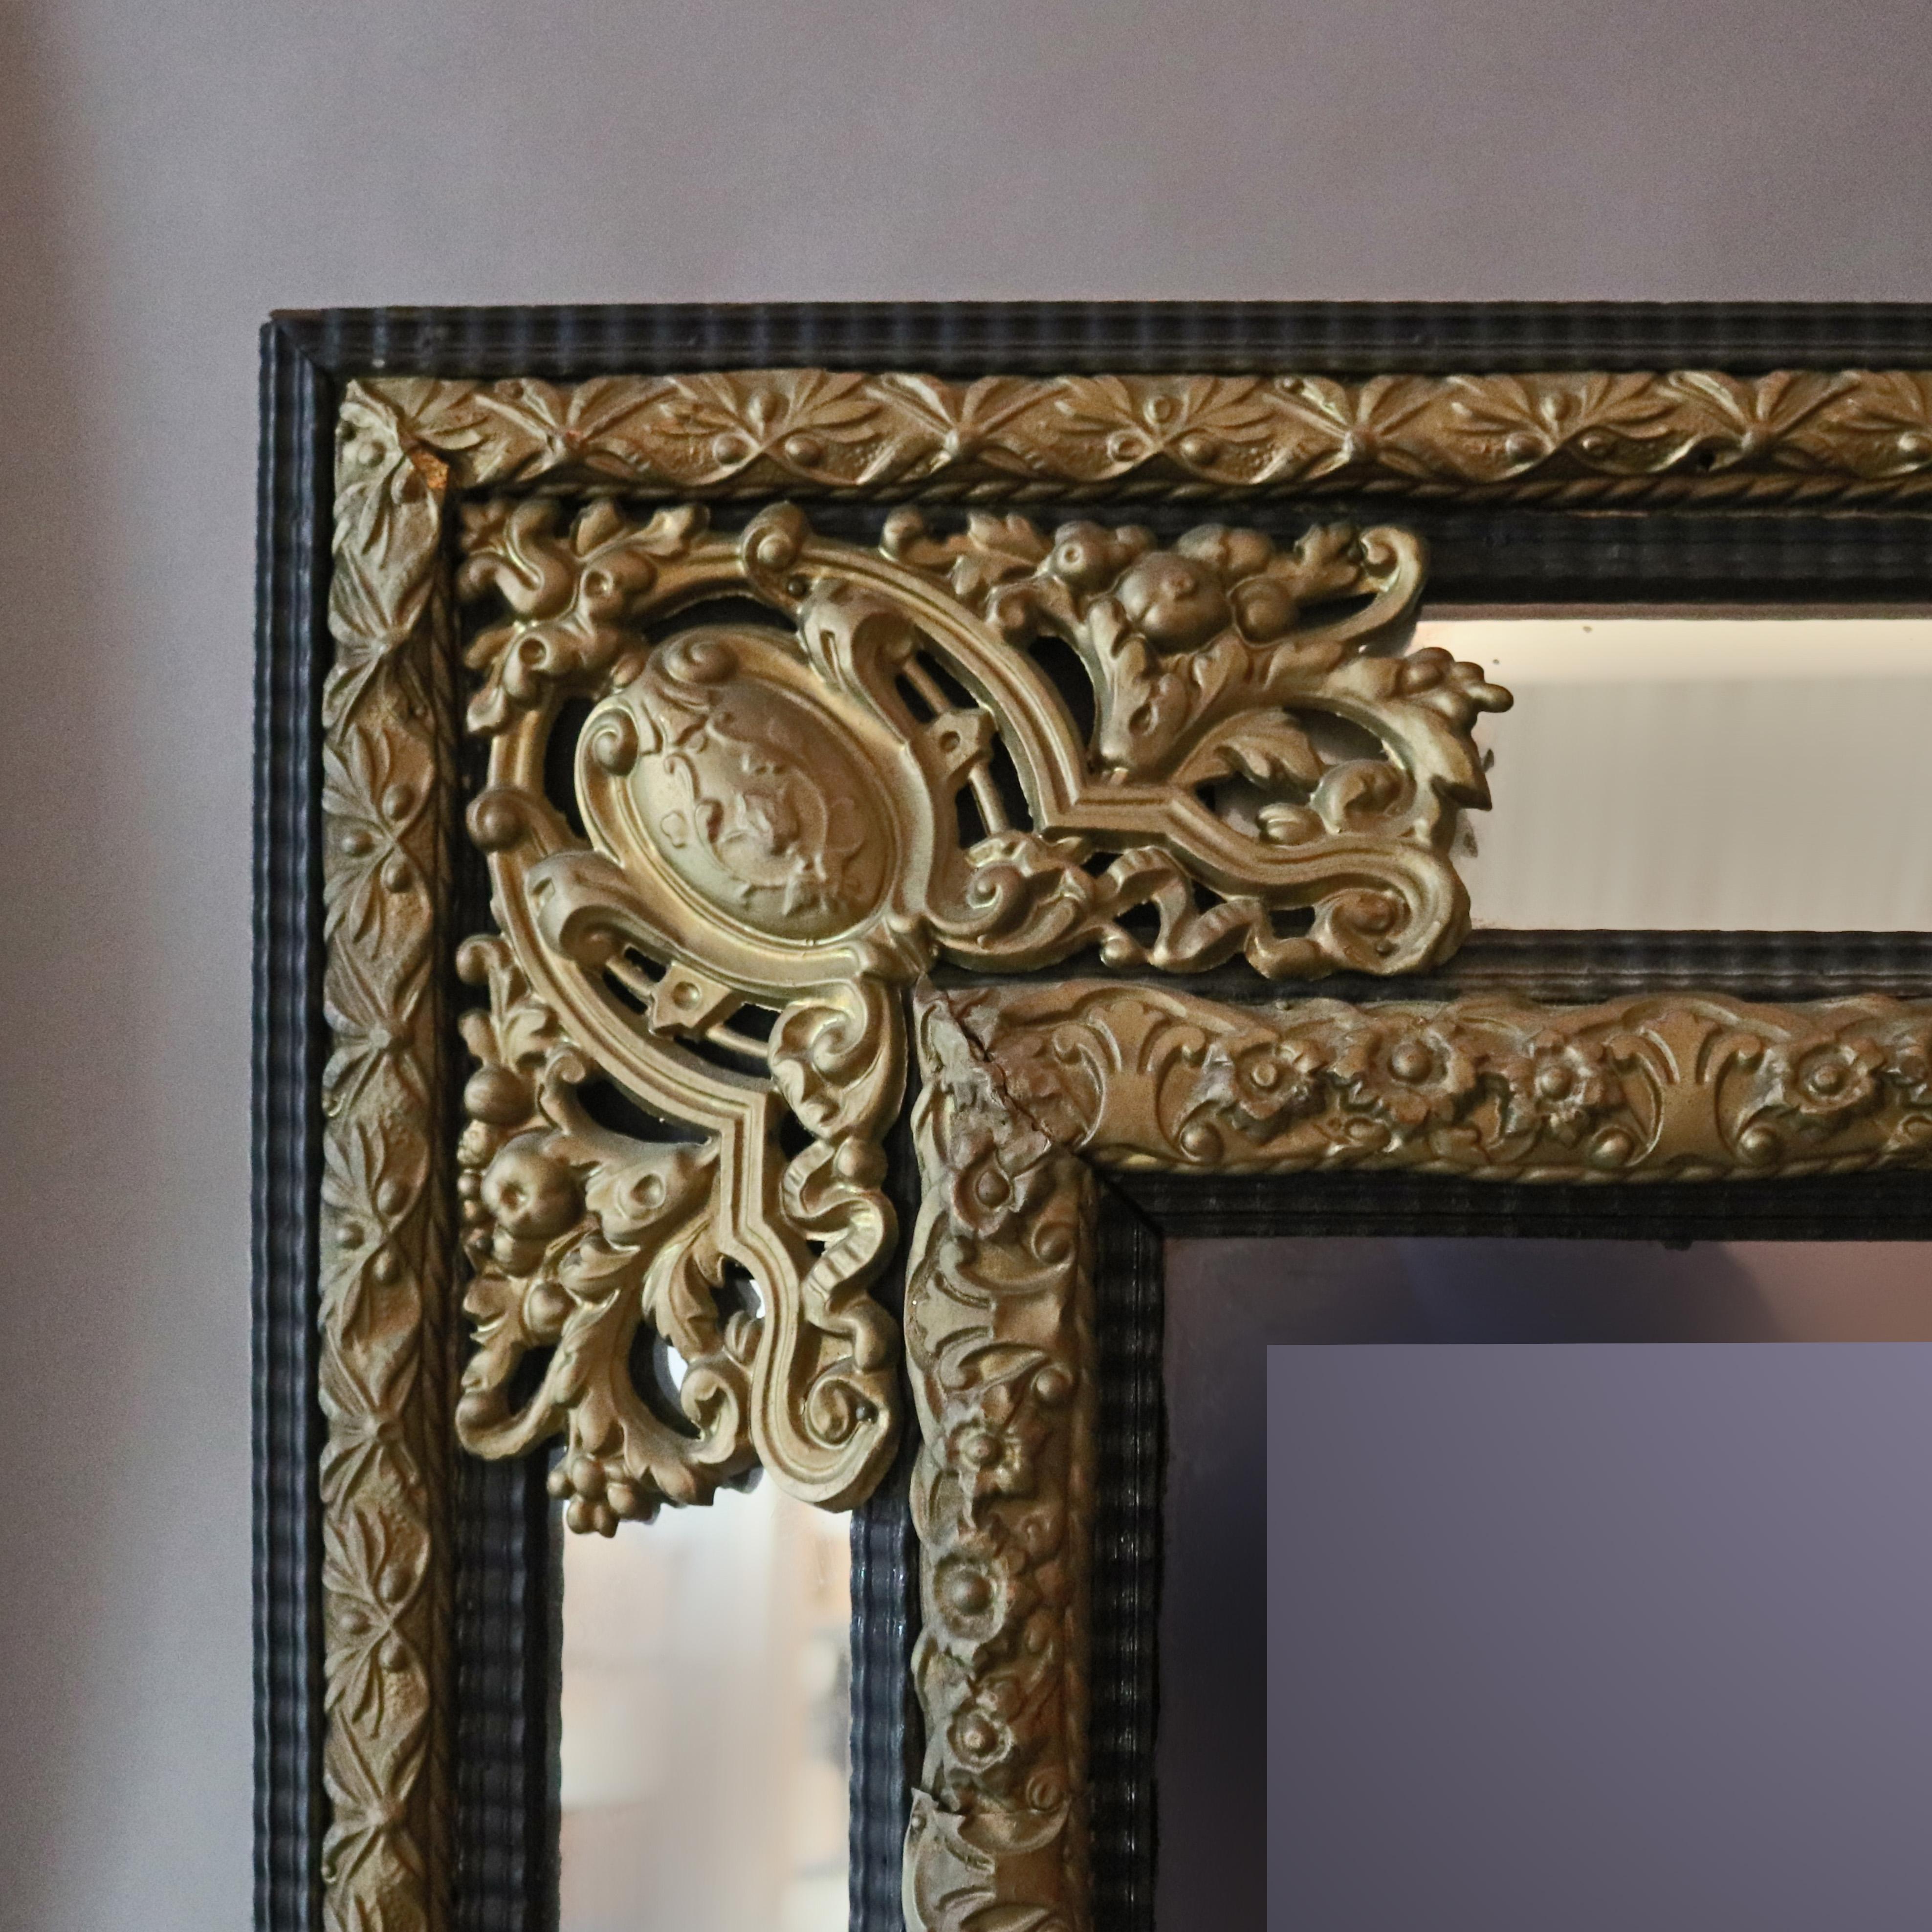 An antique baroque parclose wall mirror offers ebonized wood base with foliate and scroll pierced filigree bronzed mounts, central beveled mirror, elements of Persian designing, circa 1890.

Measures: 38